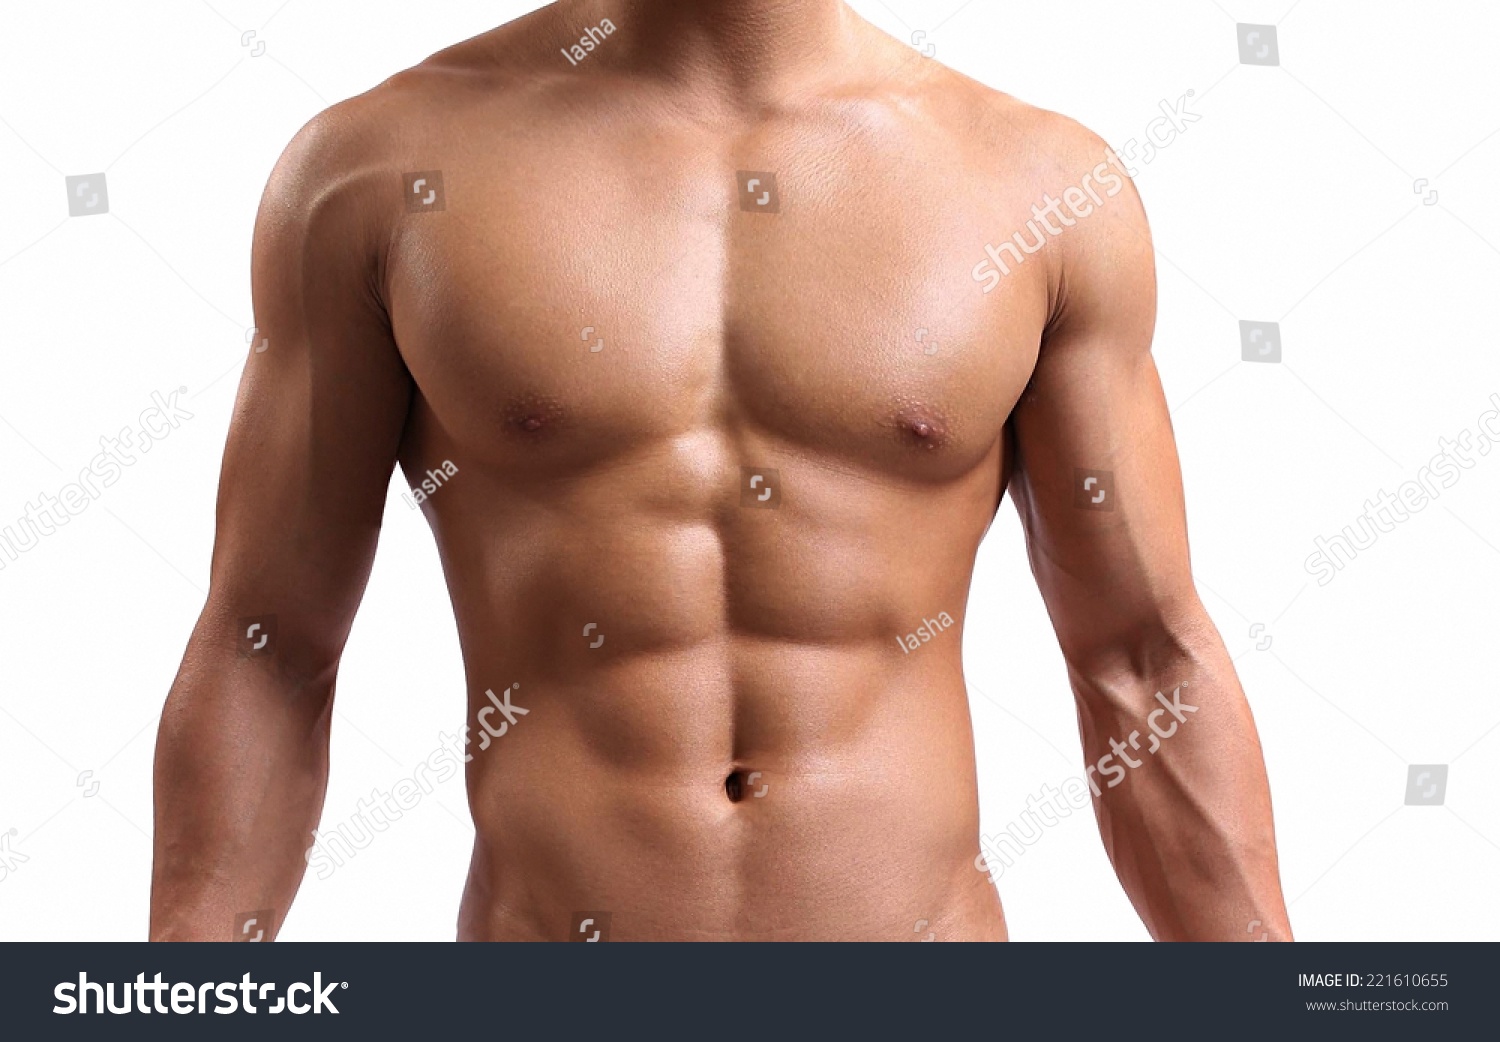 Men With Perfect Abs Measuring His Waist Stock Photo 